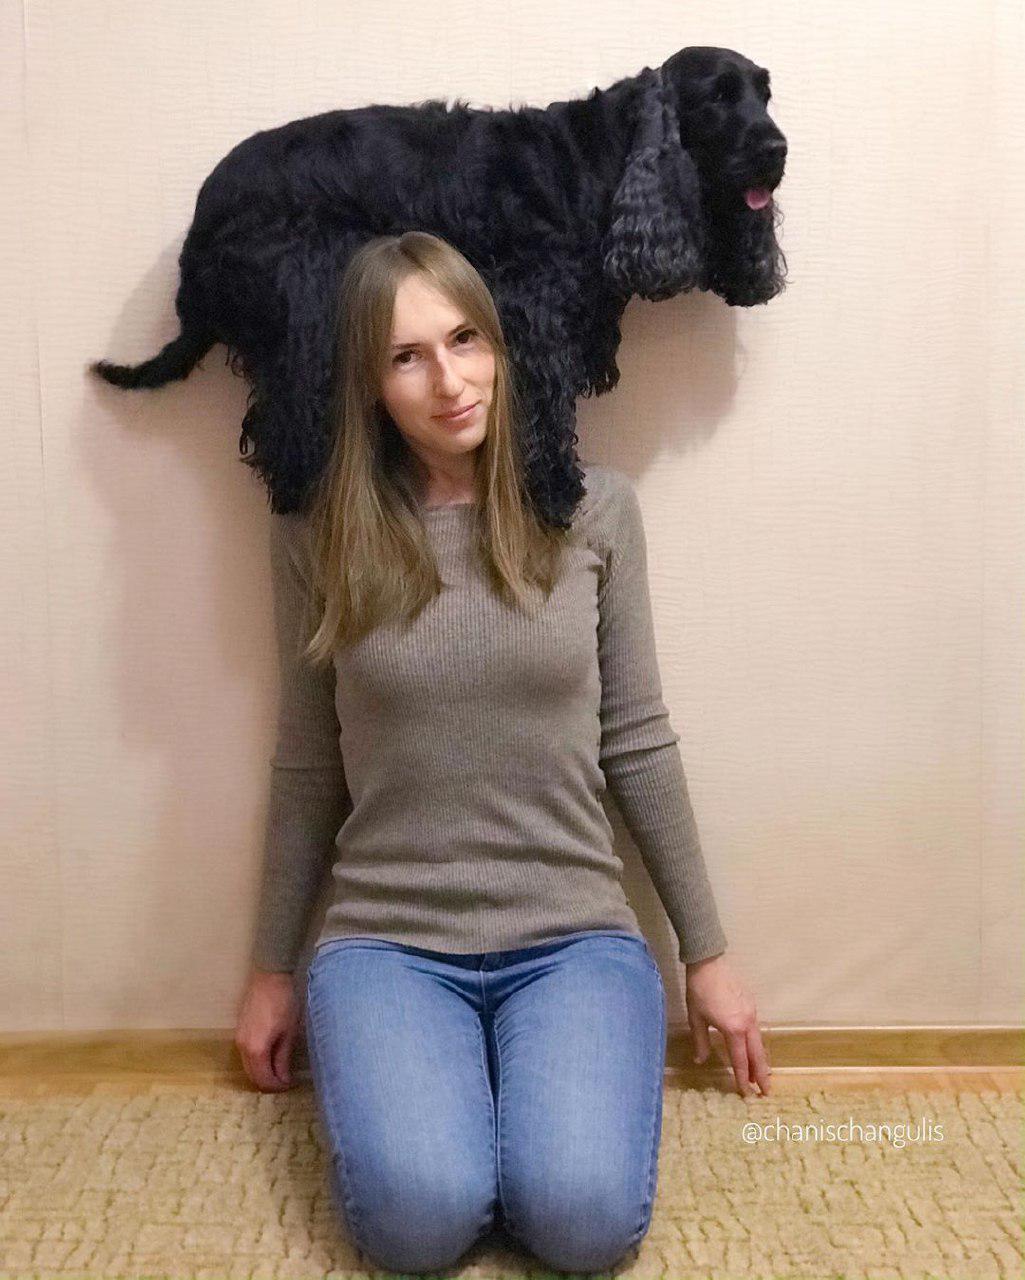 A woman sitting on the floor with a black Cocker Spaniel standing on her shoulder